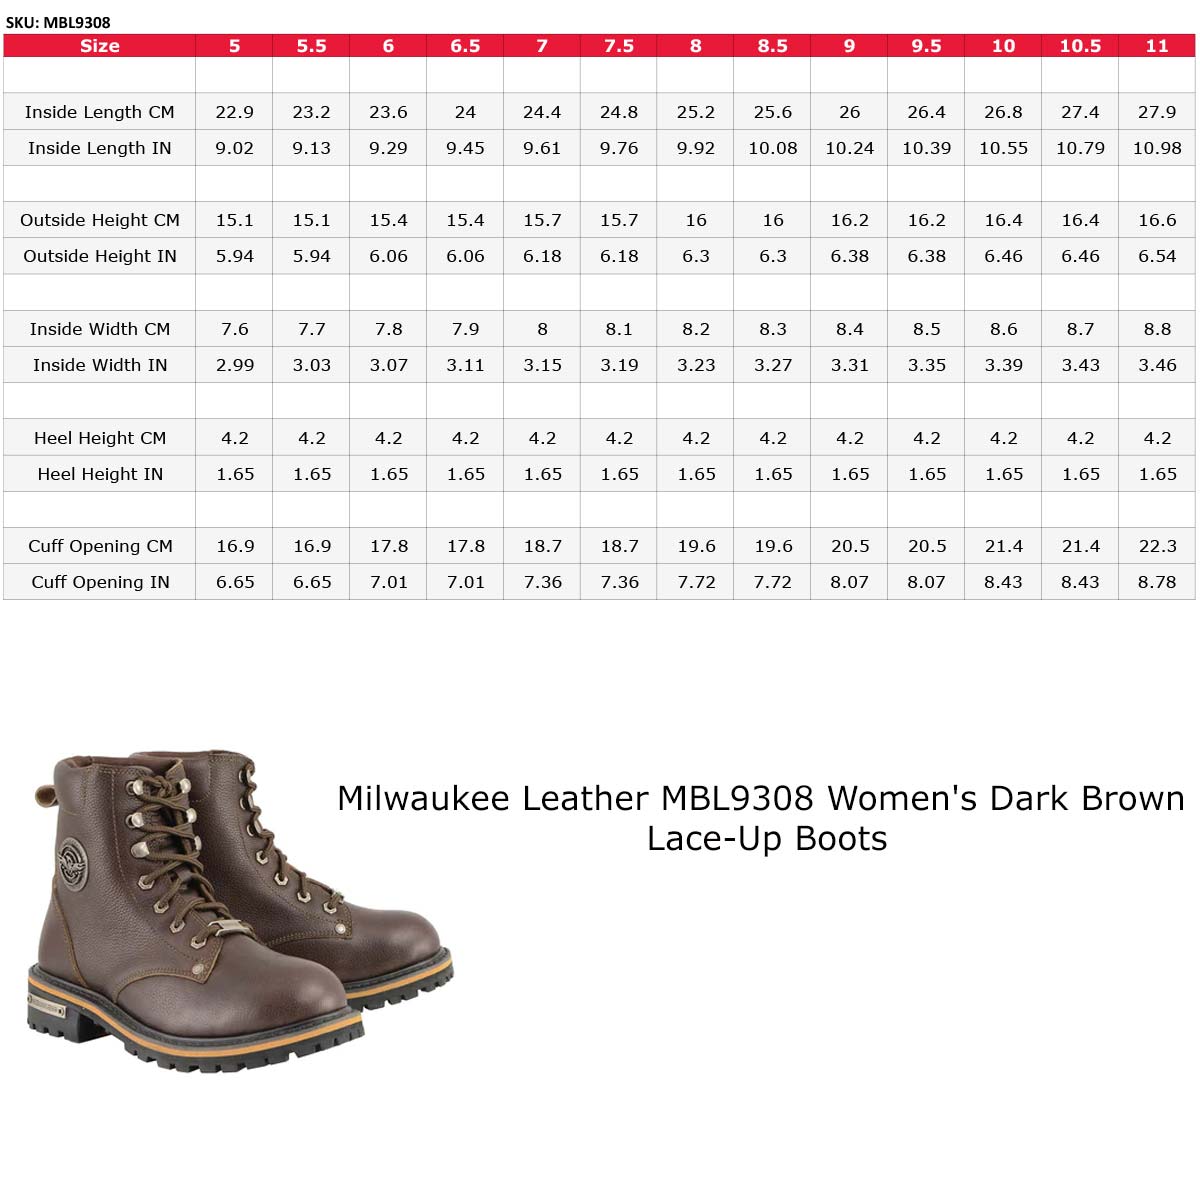 Milwaukee Leather MBL9308 Women's Dark Brown Lace-Up Boots